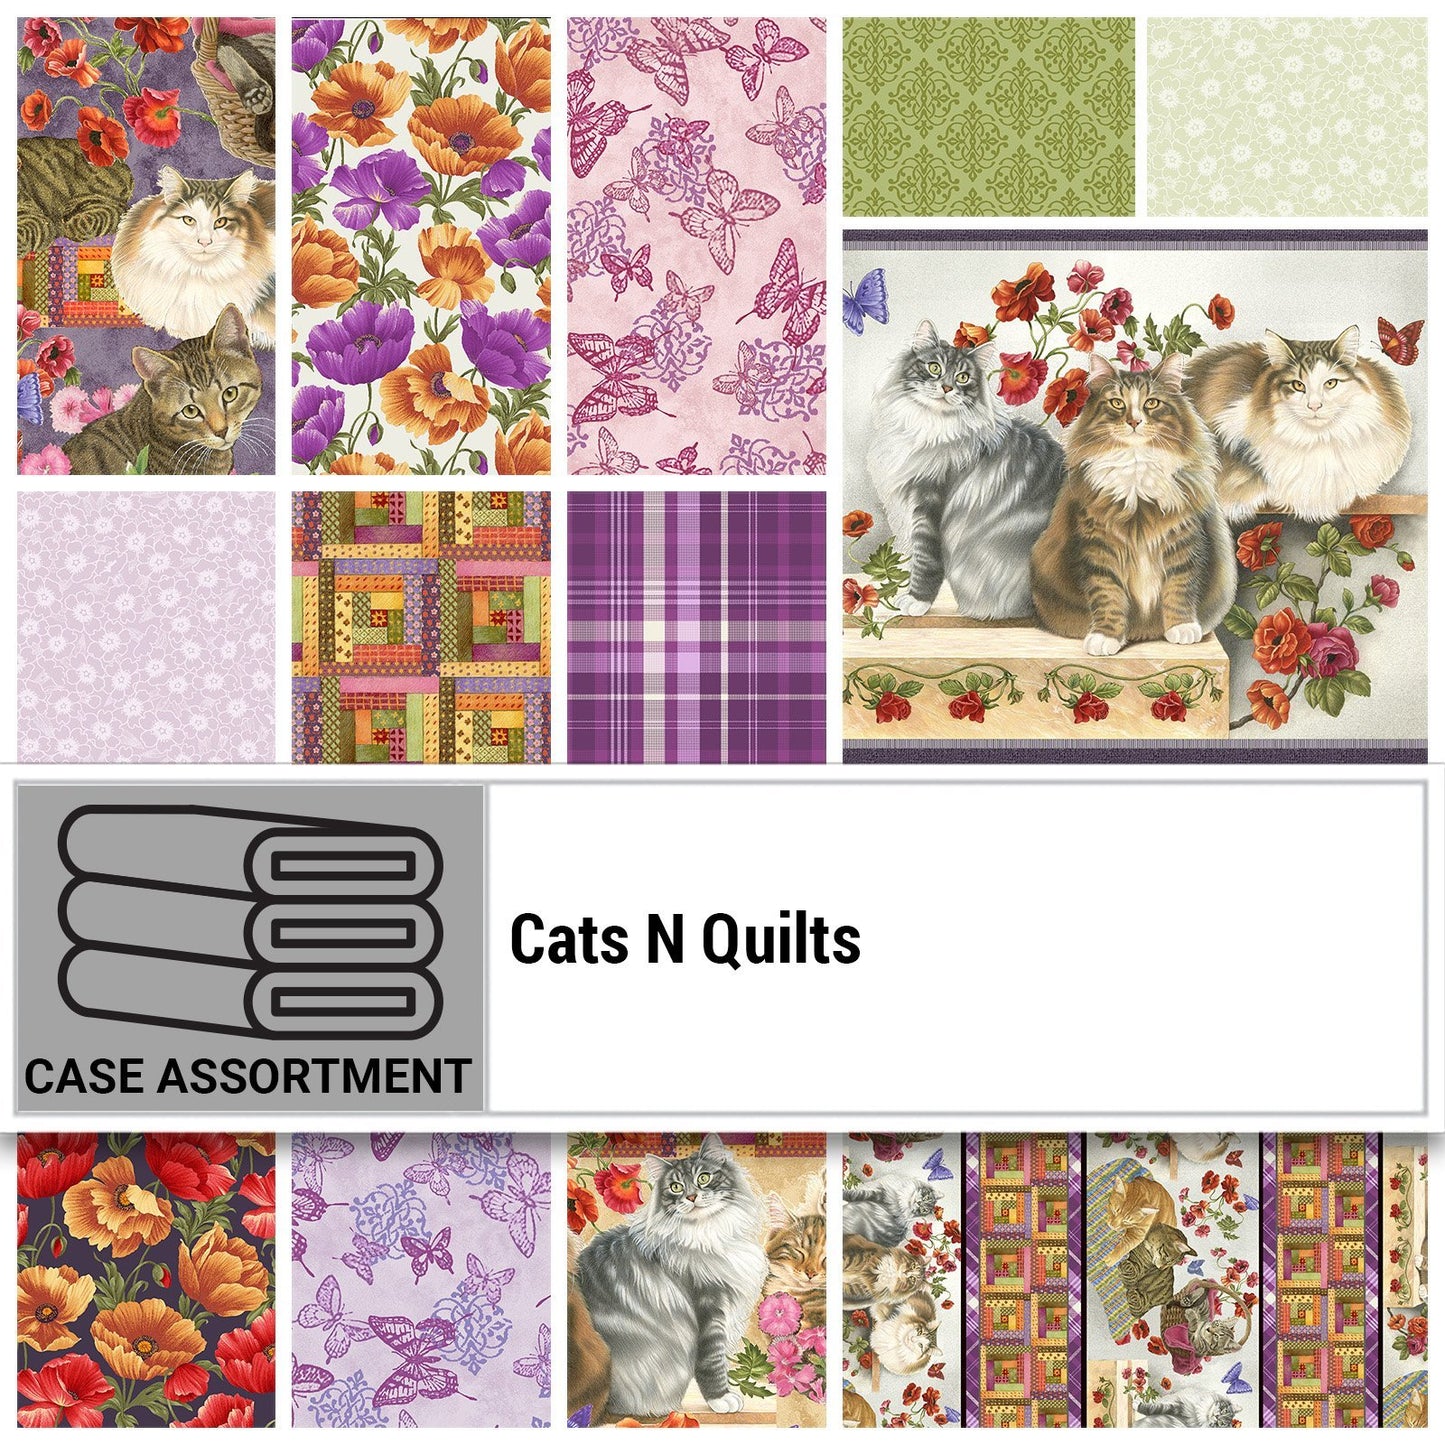 Cats N Quilts - Butterfly Medallion Fuchsia - Licence To Quilt